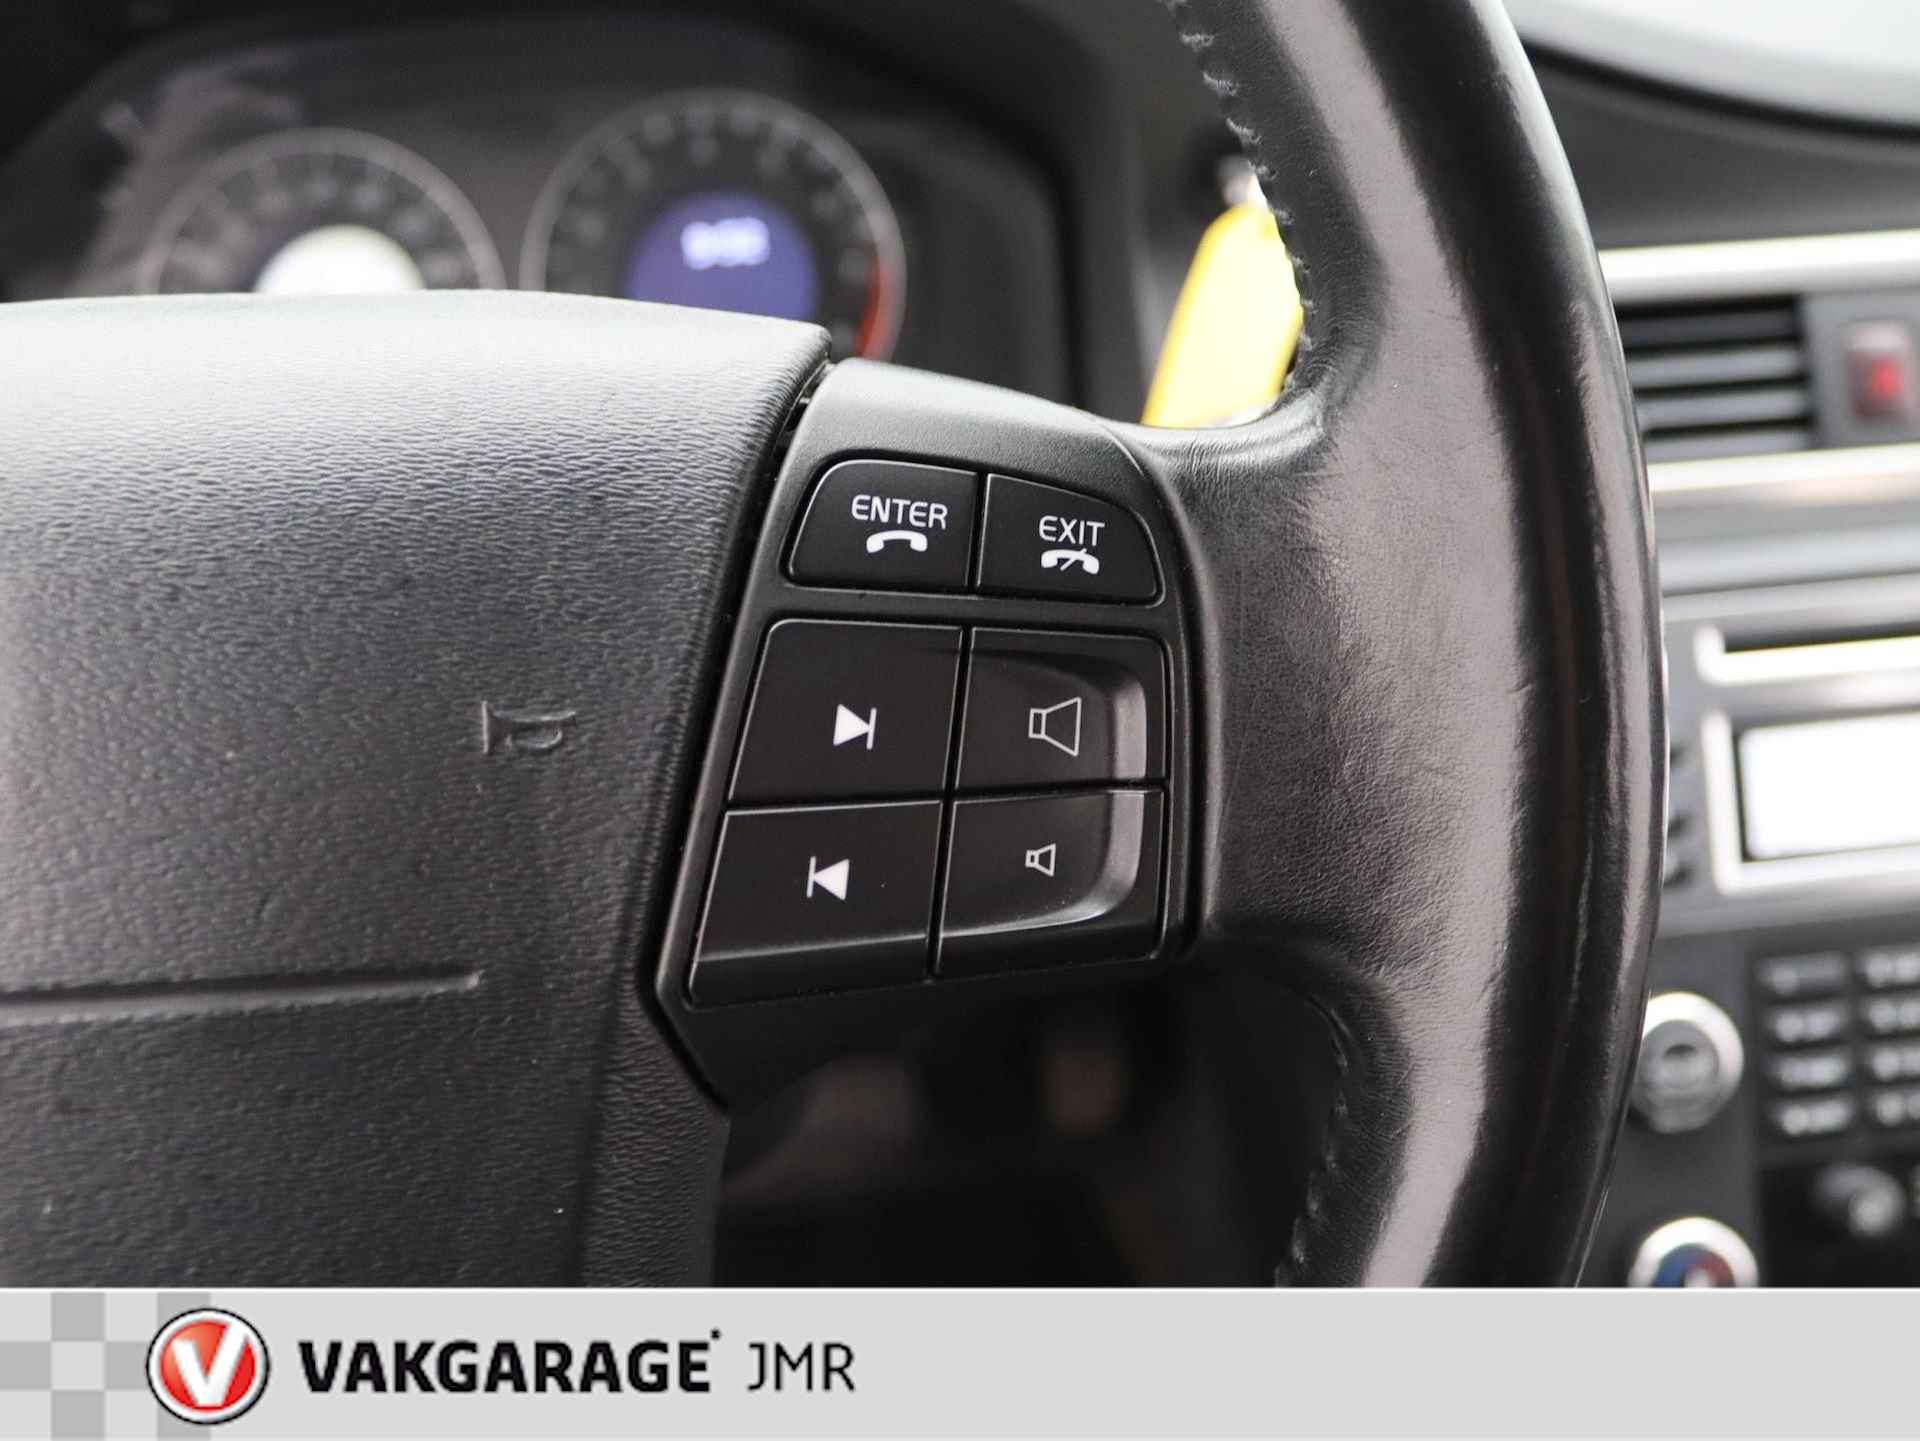 Volvo V70 2.5FT Momentum Youngtimer Trekhaak - PDC Achter - Stoel + Achterbank verwarming - Bluetooth - Climate en Cruise Control - 25/39